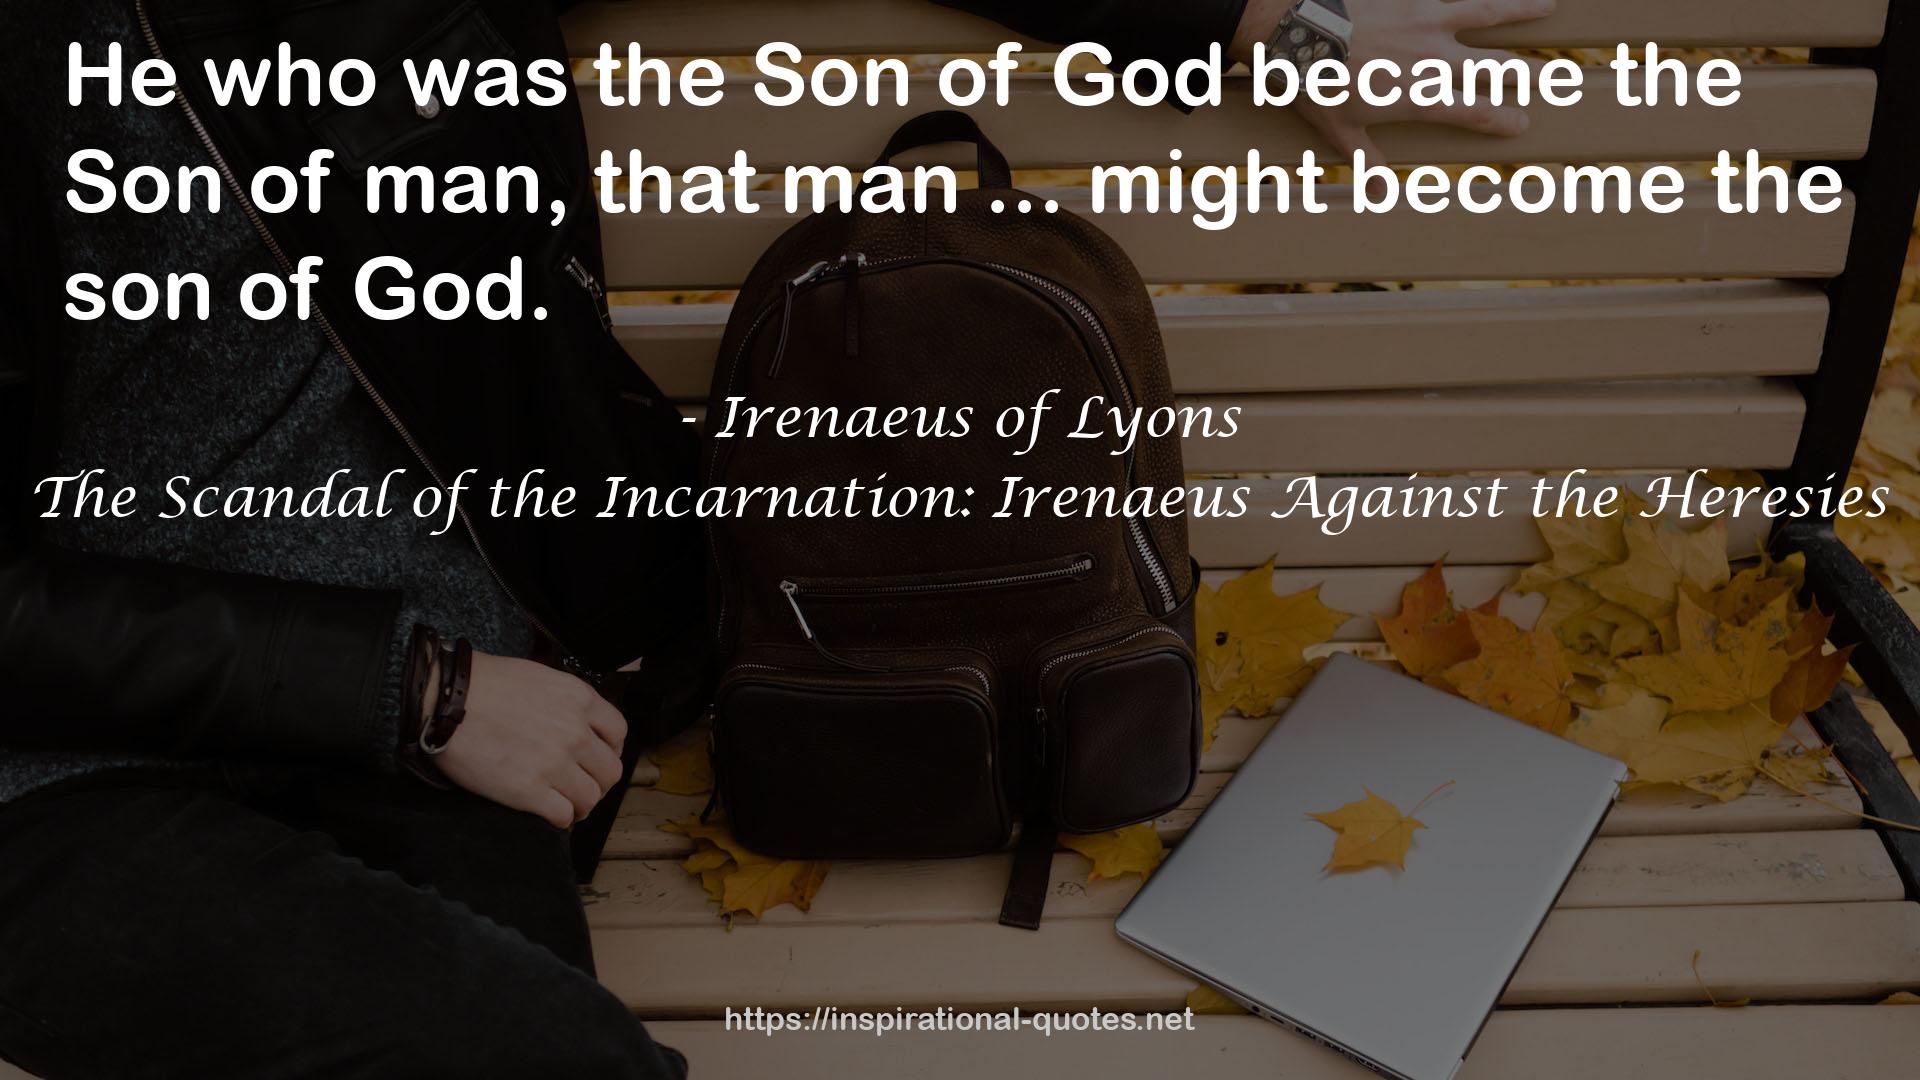 The Scandal of the Incarnation: Irenaeus Against the Heresies QUOTES